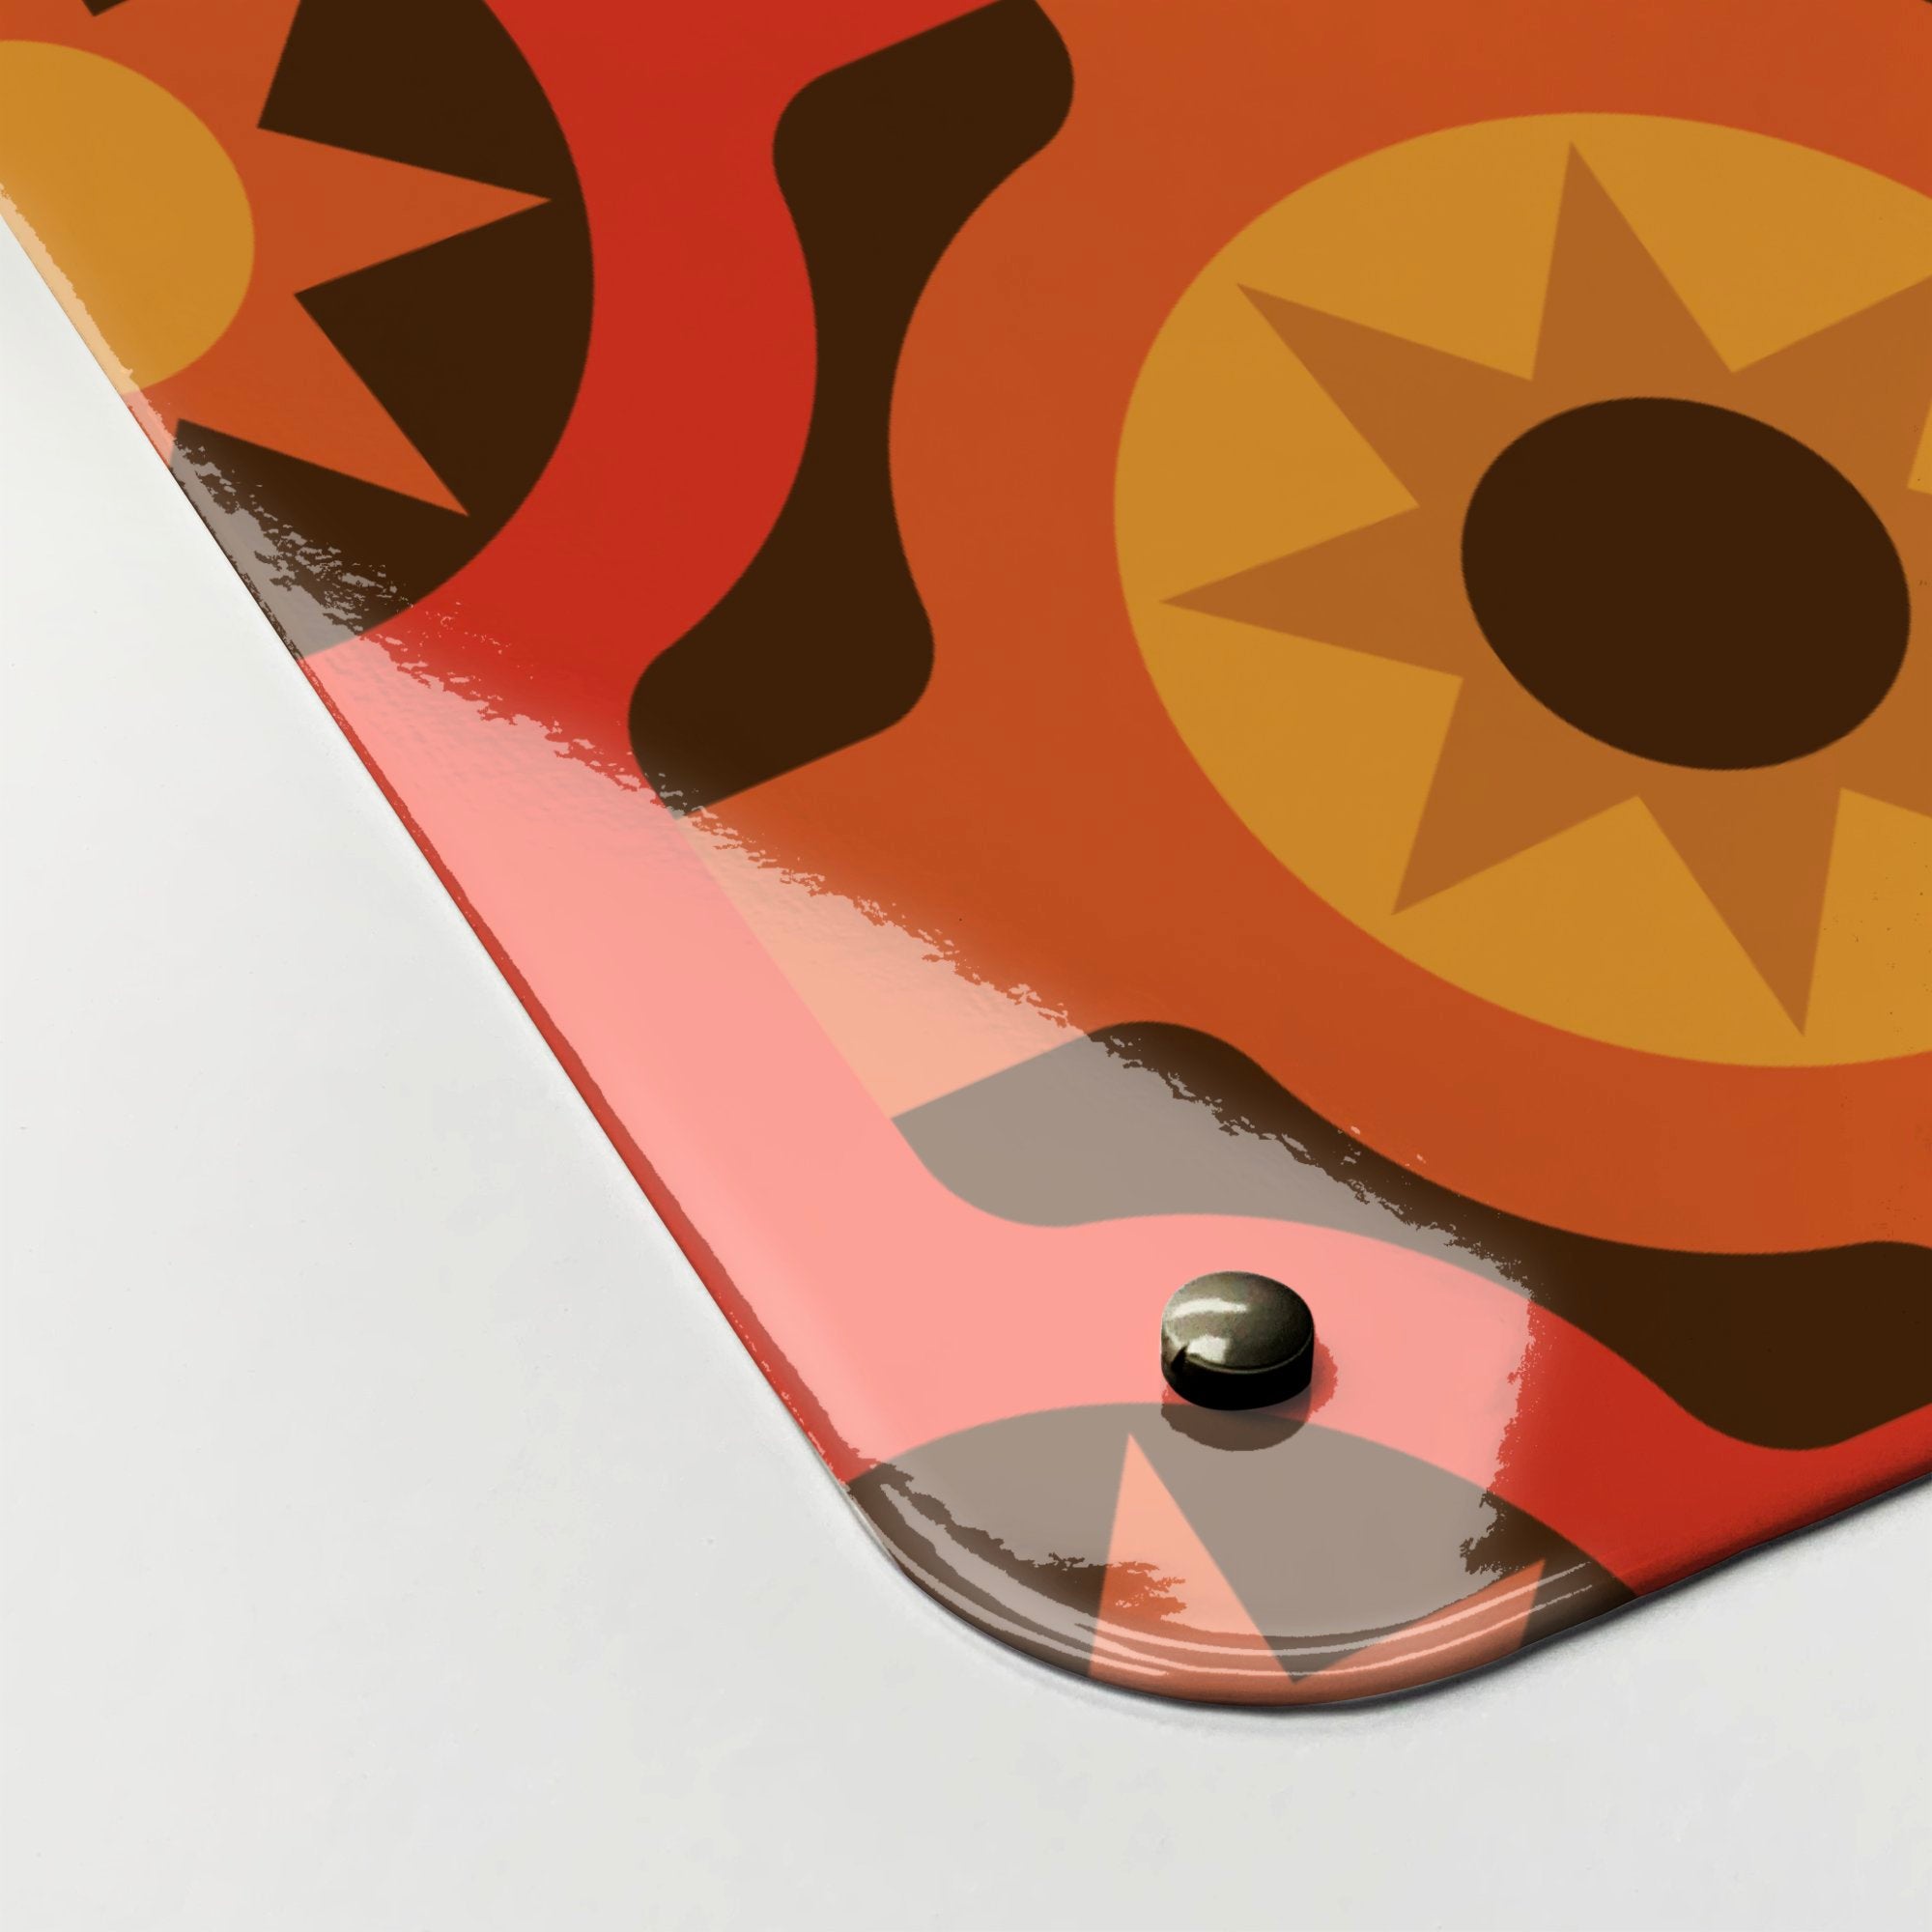 A corner detail to show high gloss surface of a large magnetic notice board with a retro orange and brown pattern